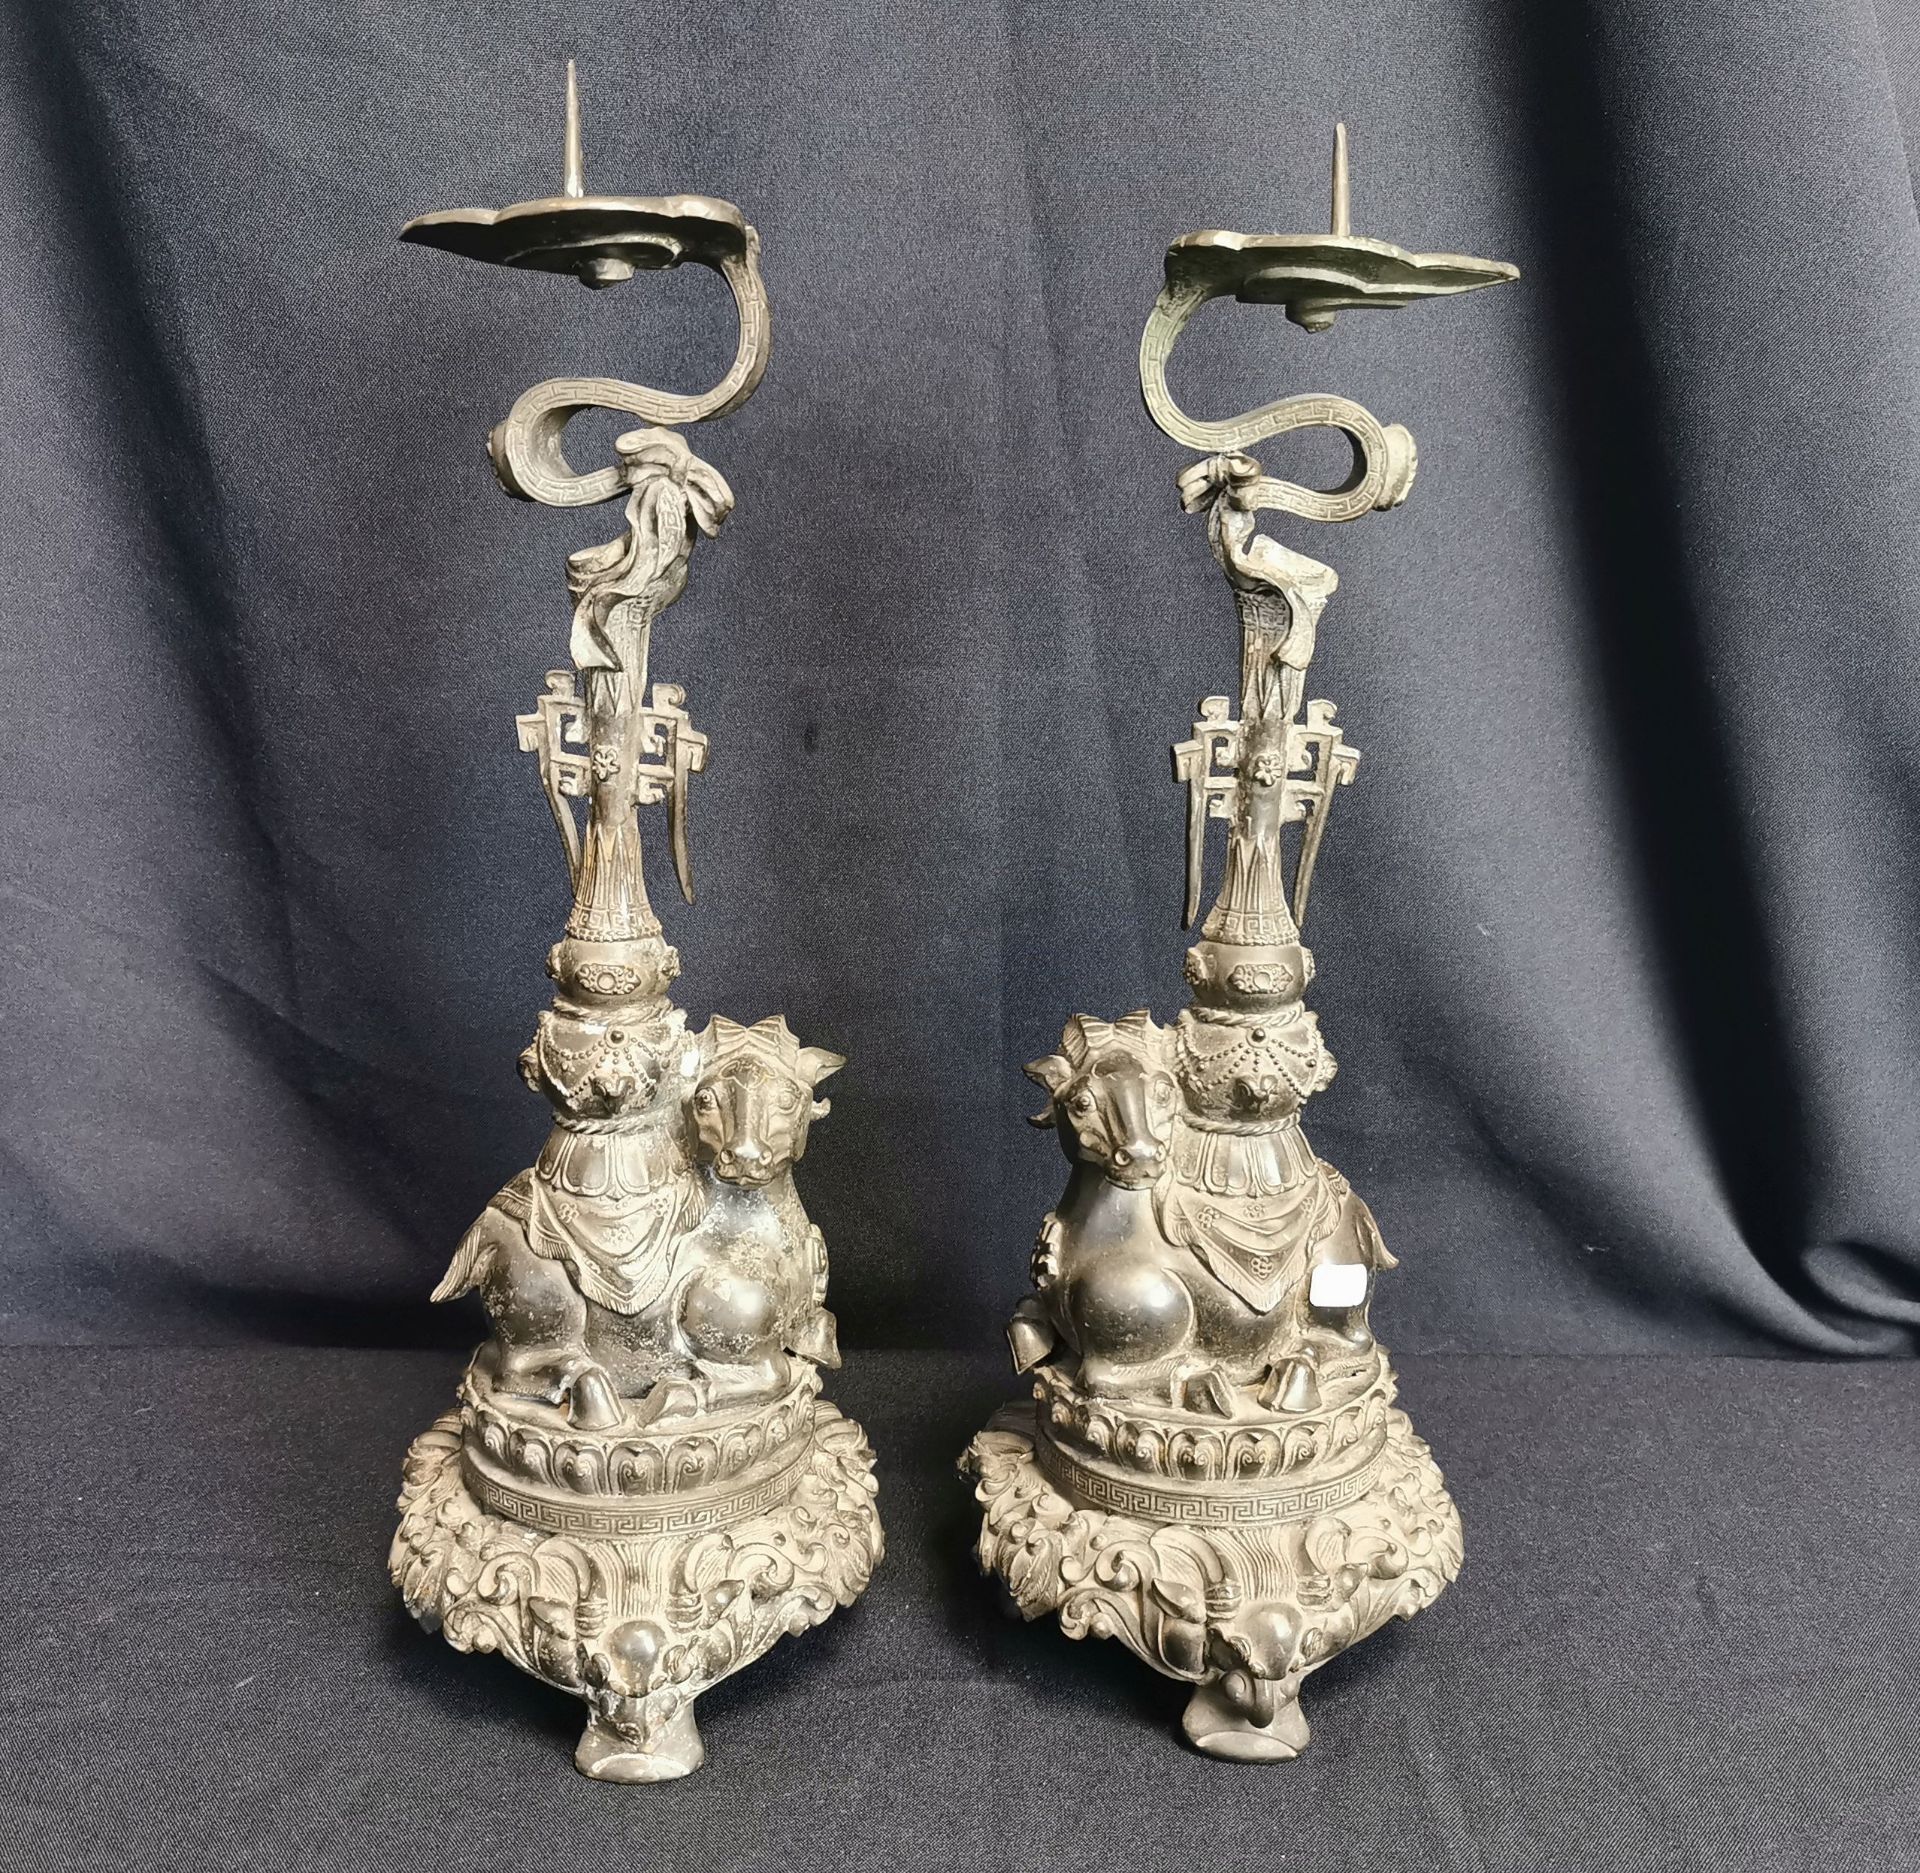 PAIR OF CANDLE STANDS WITH RAMS